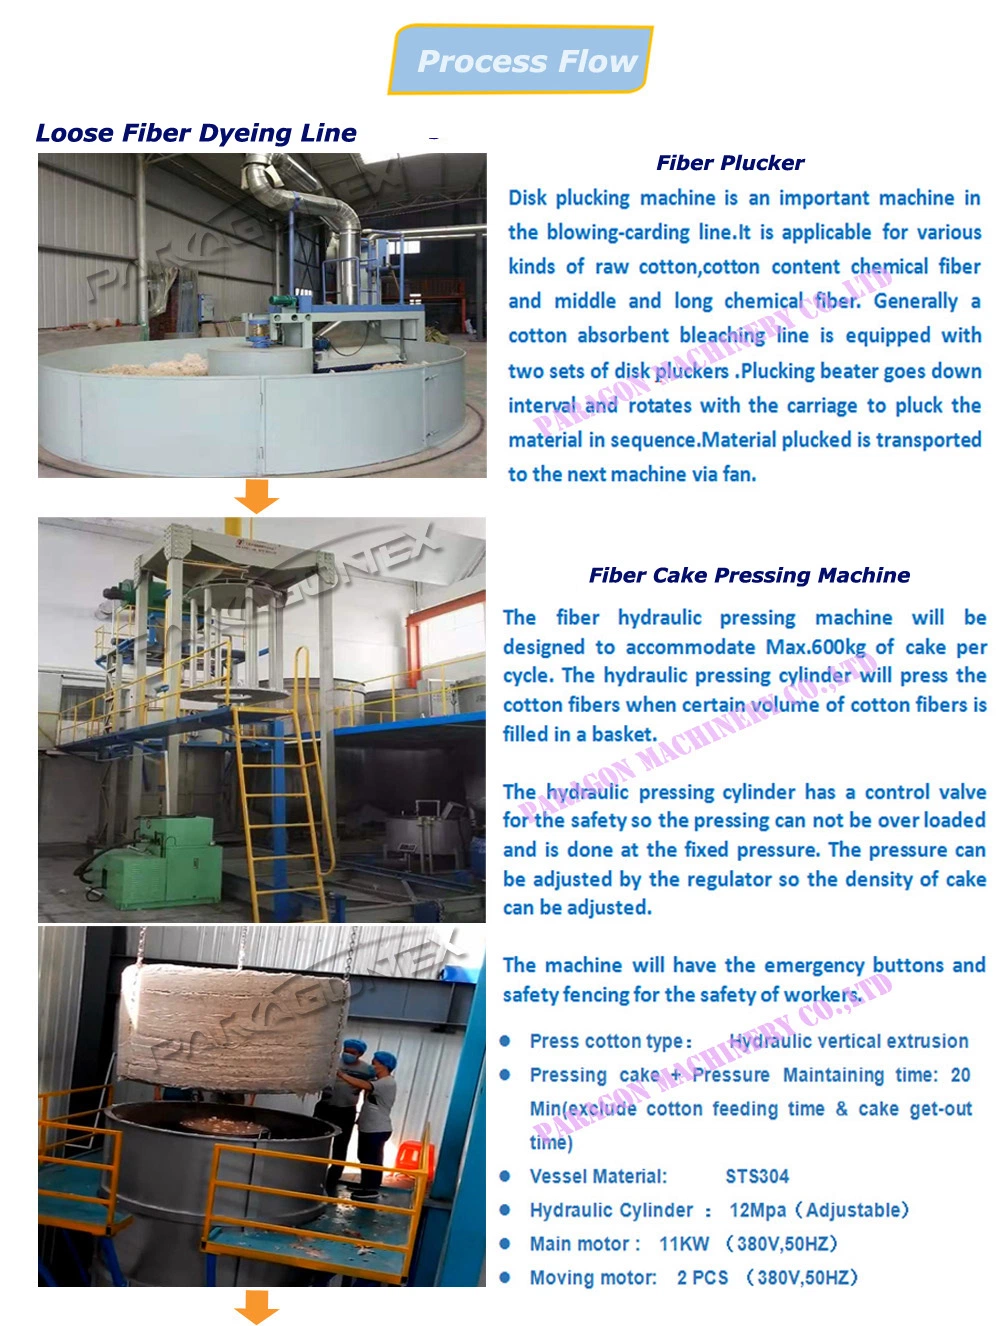 Automatic Dewatering Machine for Loose Fiber Production Line